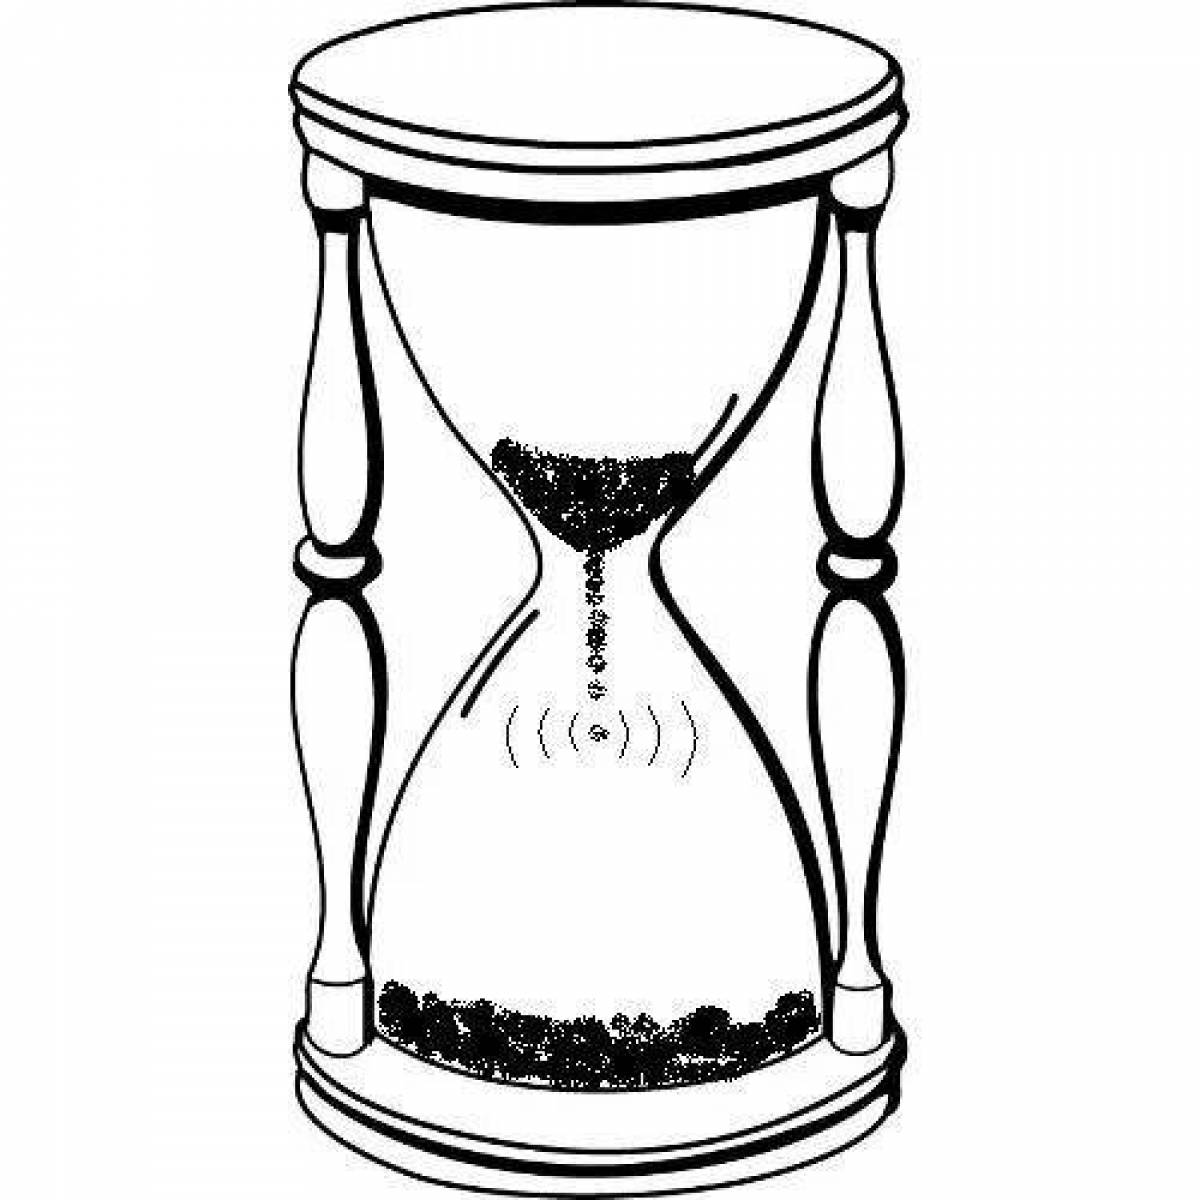 Coloring hourglass coloring page